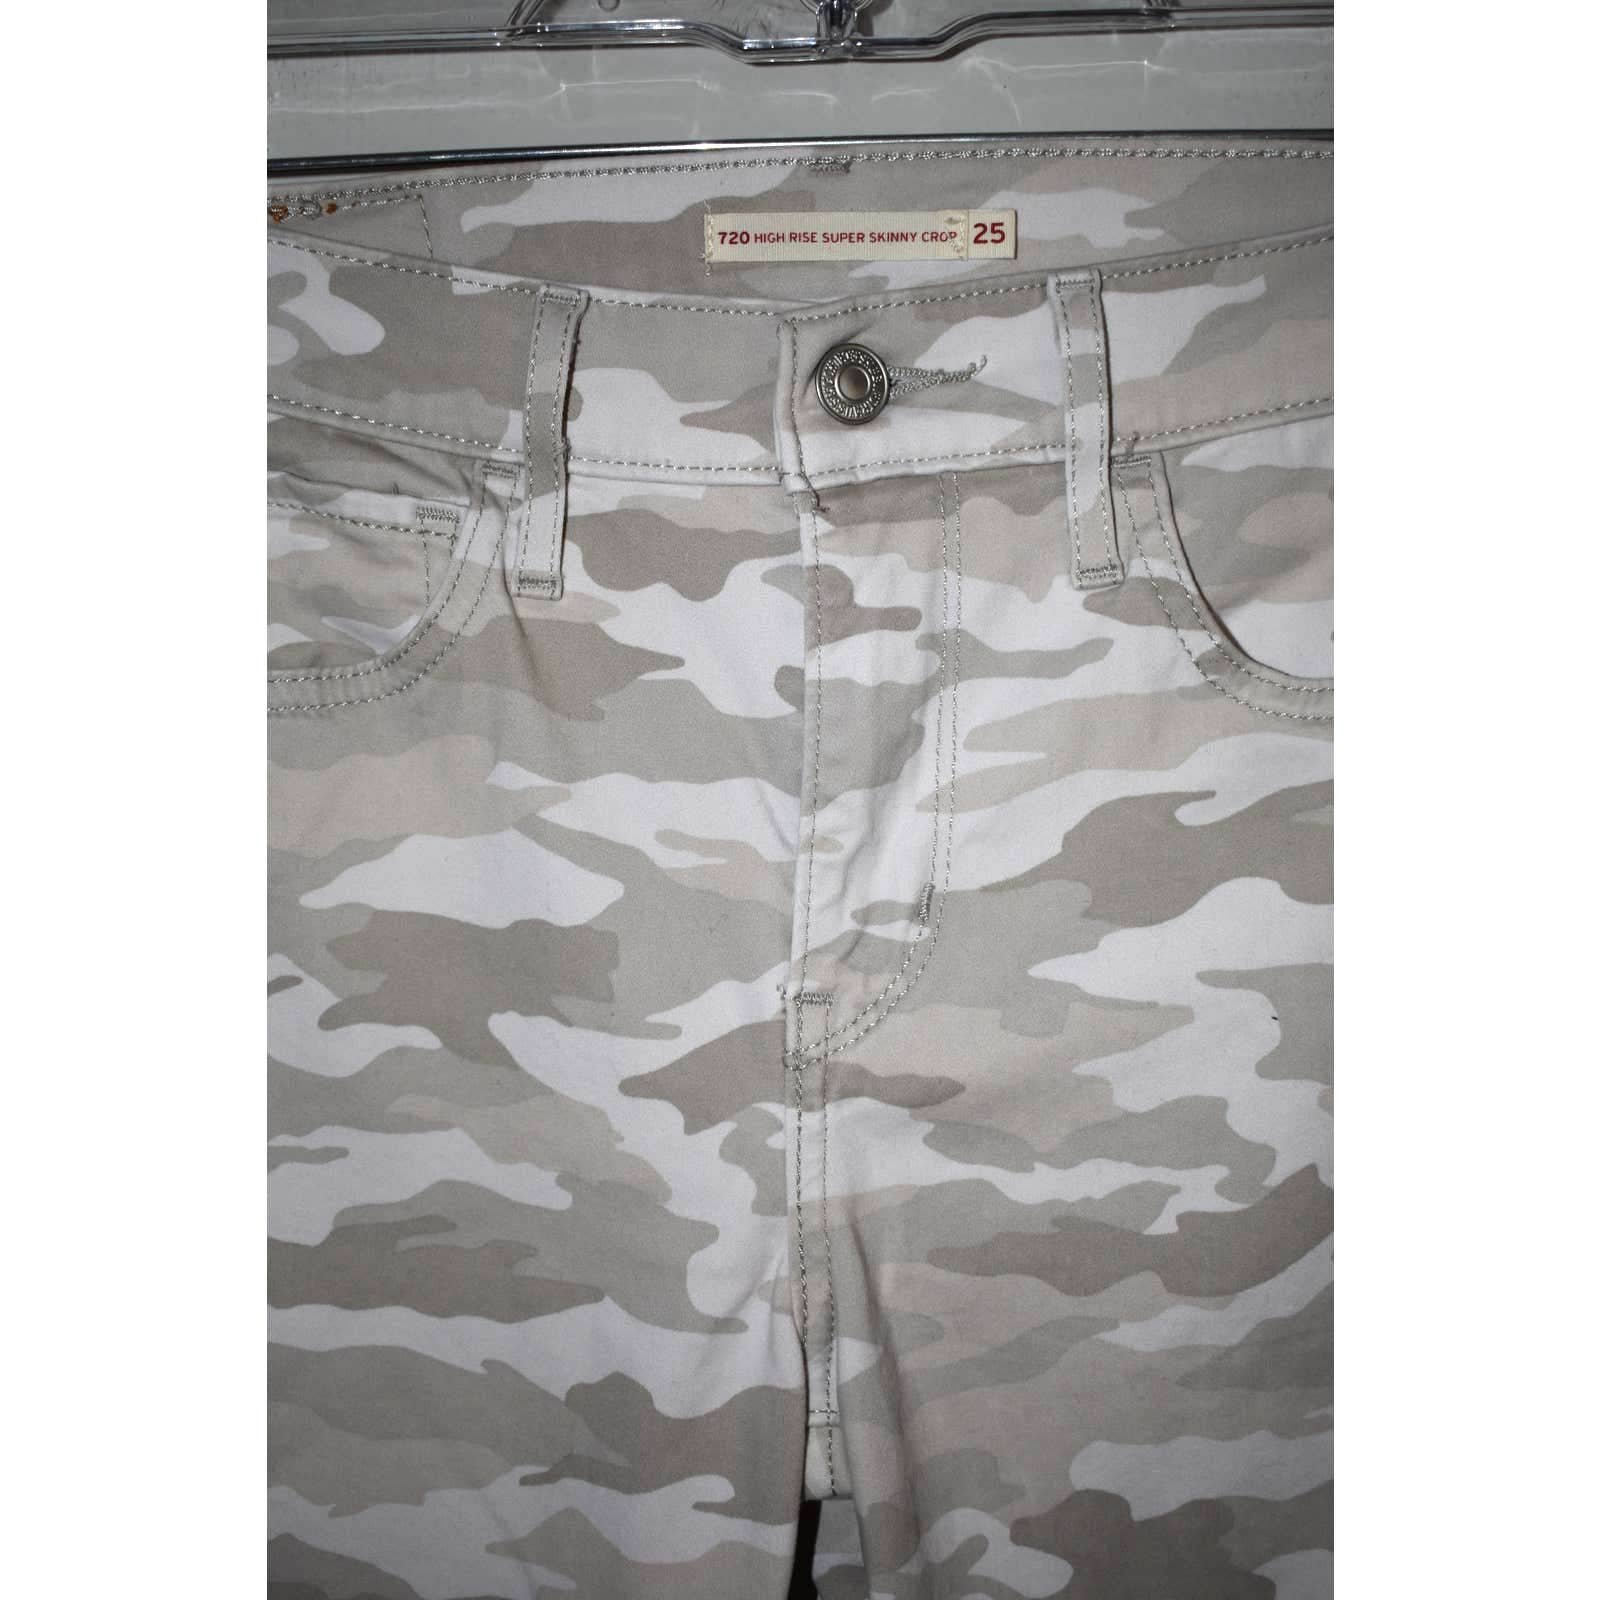 Gorgeous Levi´s Camo High Rise Super Skinny Crop Jean Size 25 PBgtGgmC3 Everyday Low Prices